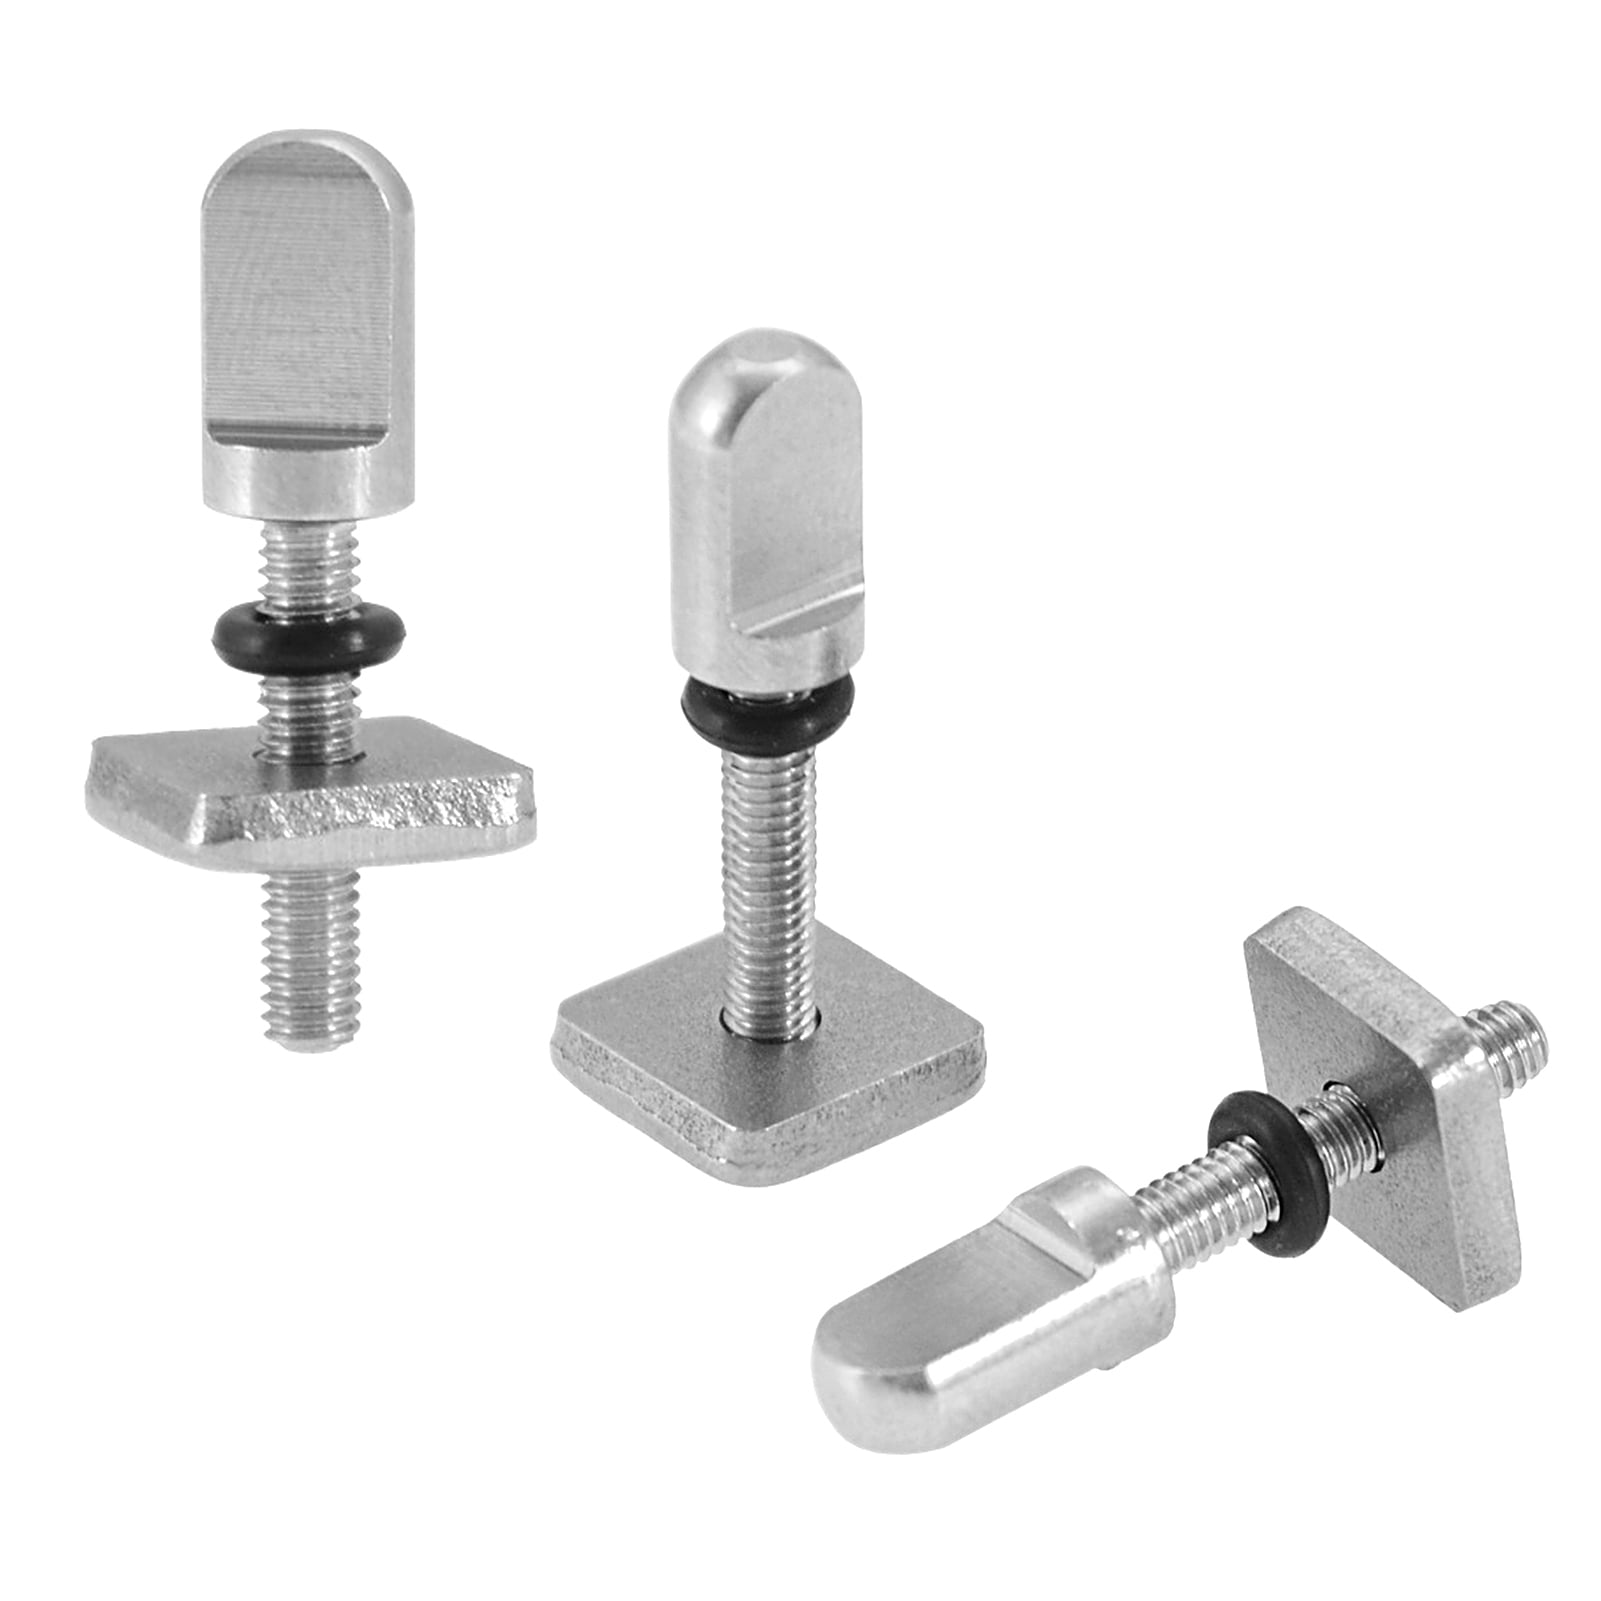 WonderBolt screw &plate-5FOR 1 deal-Stainless Steel for Longboard,surfboards,SUP 